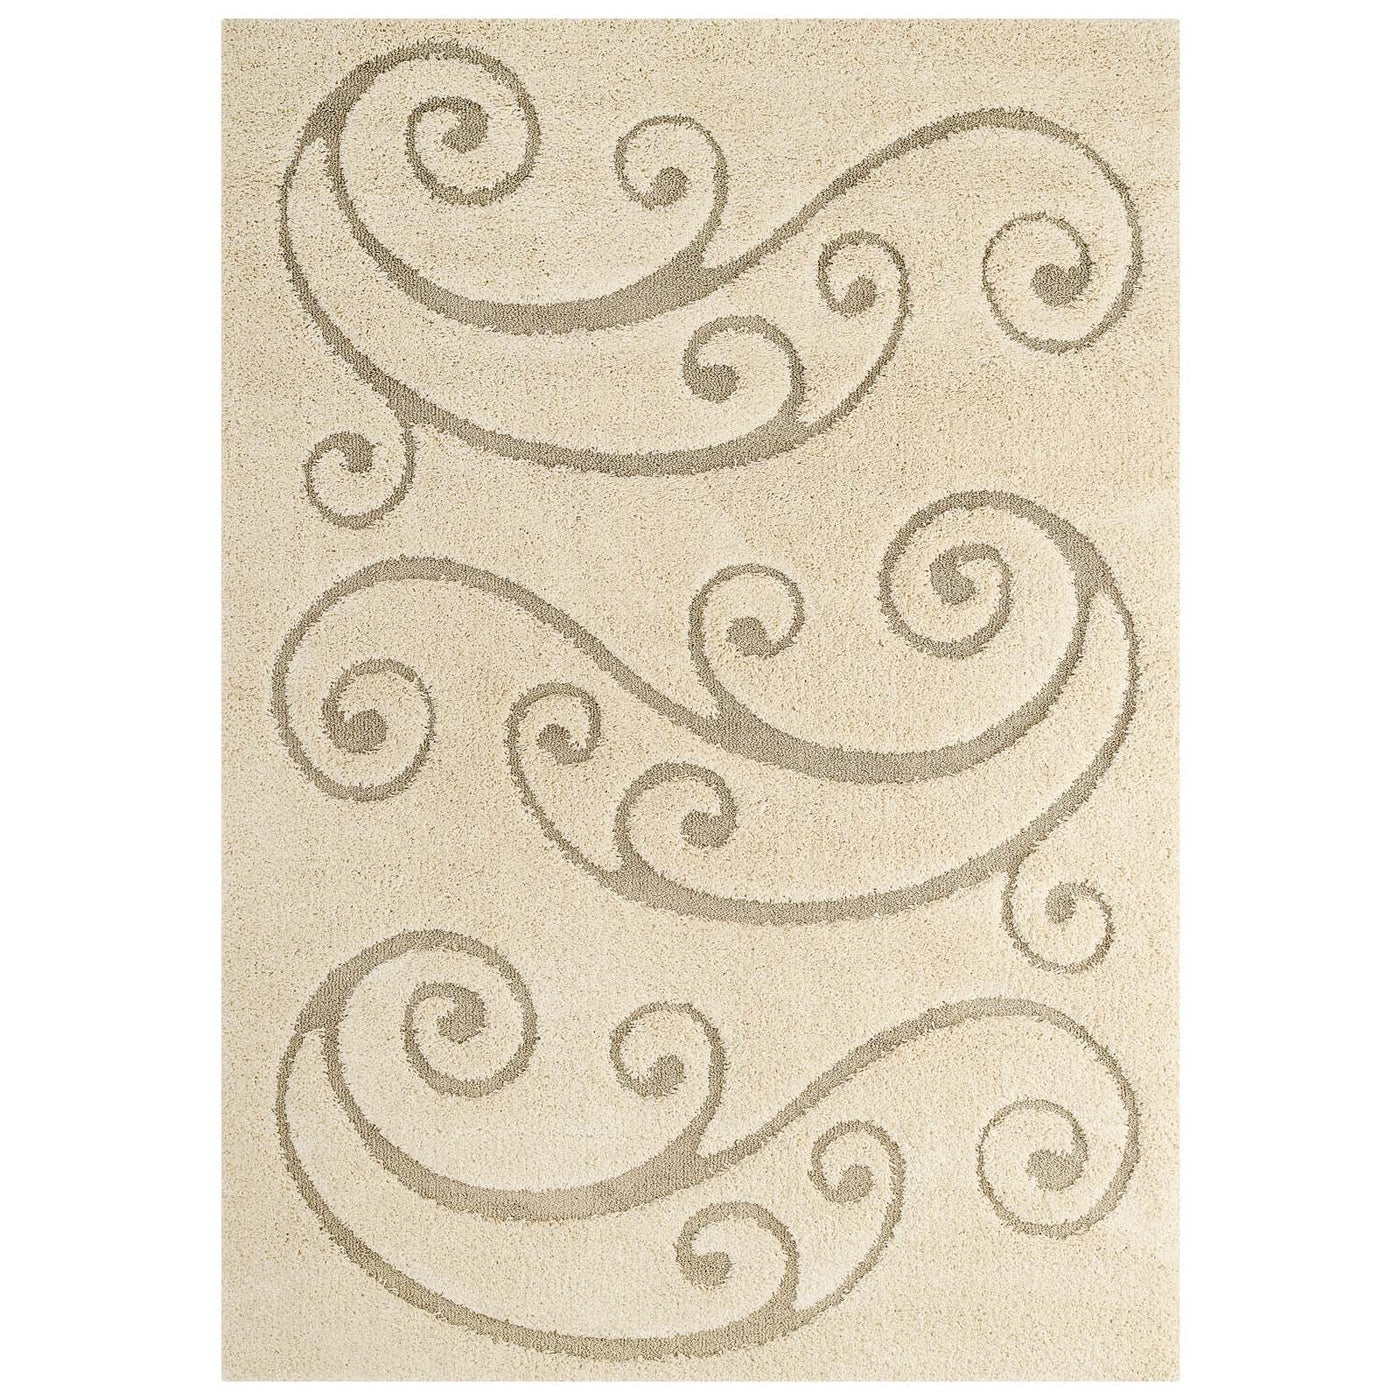 Jubilant Sprout Scrolling Vine Shag Area Rug